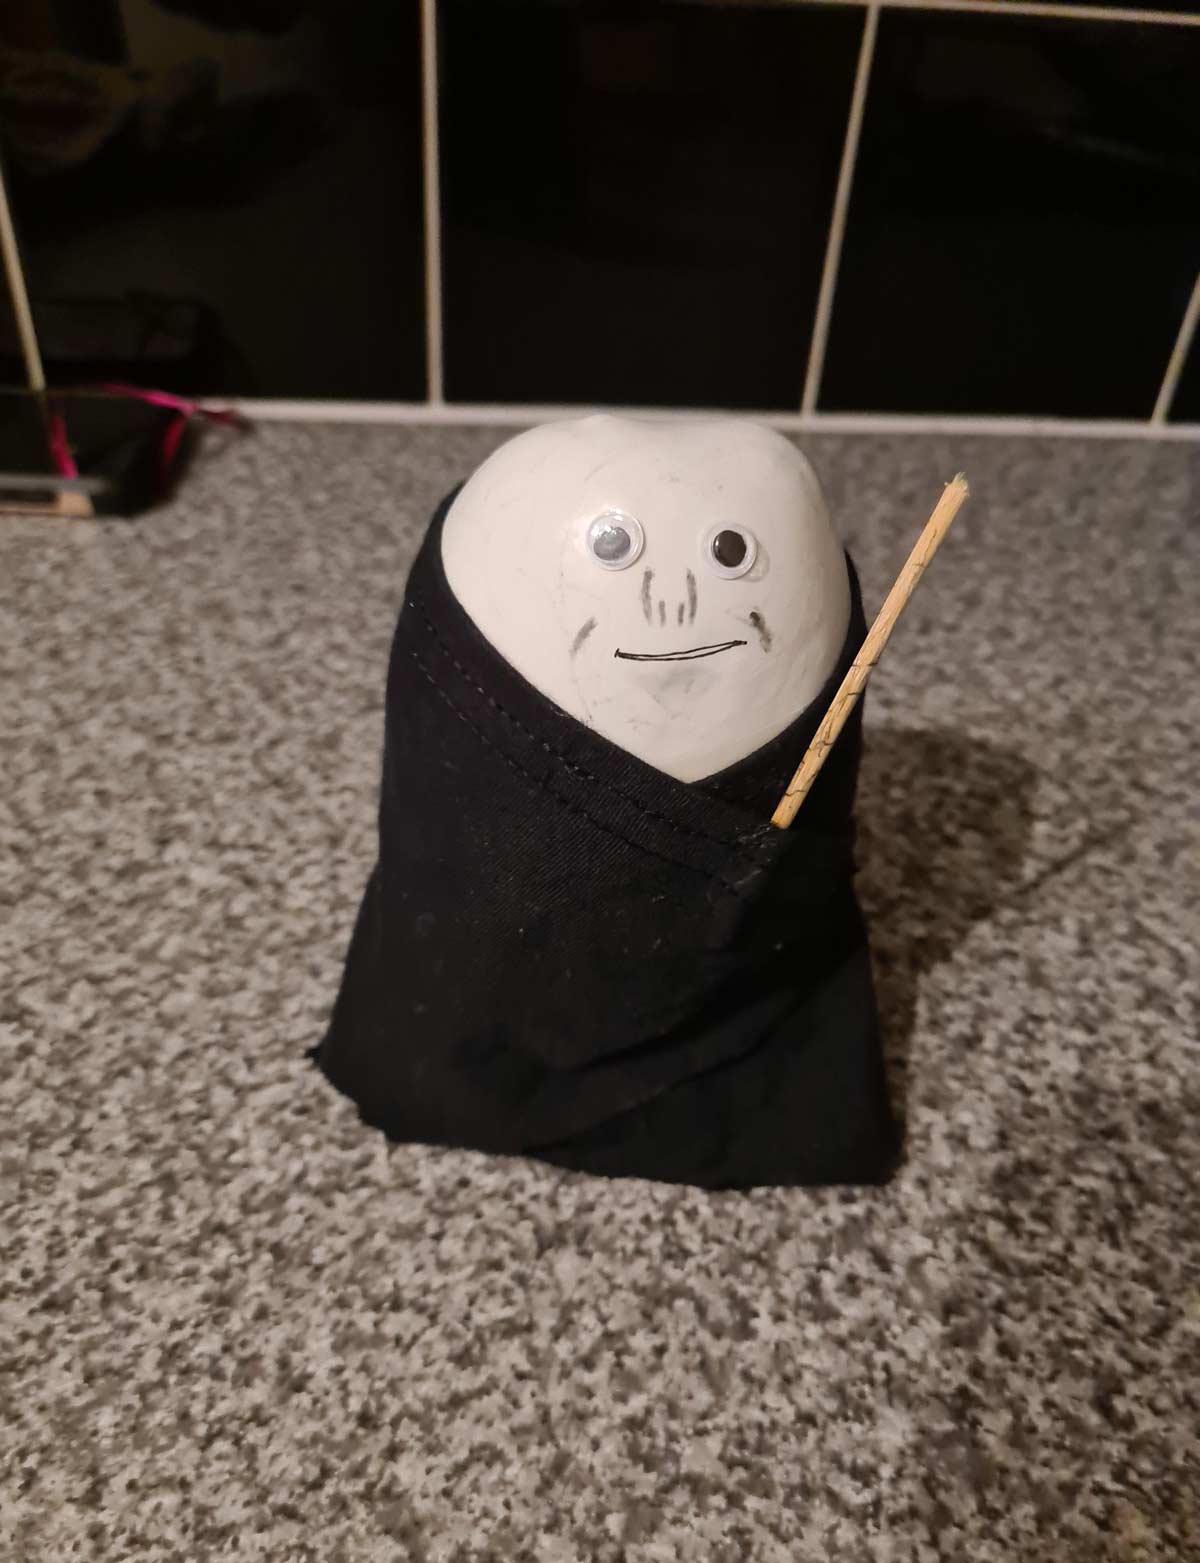 My daughter's school doesn't do dressing up for world book day, but we have to dress a potato as a character